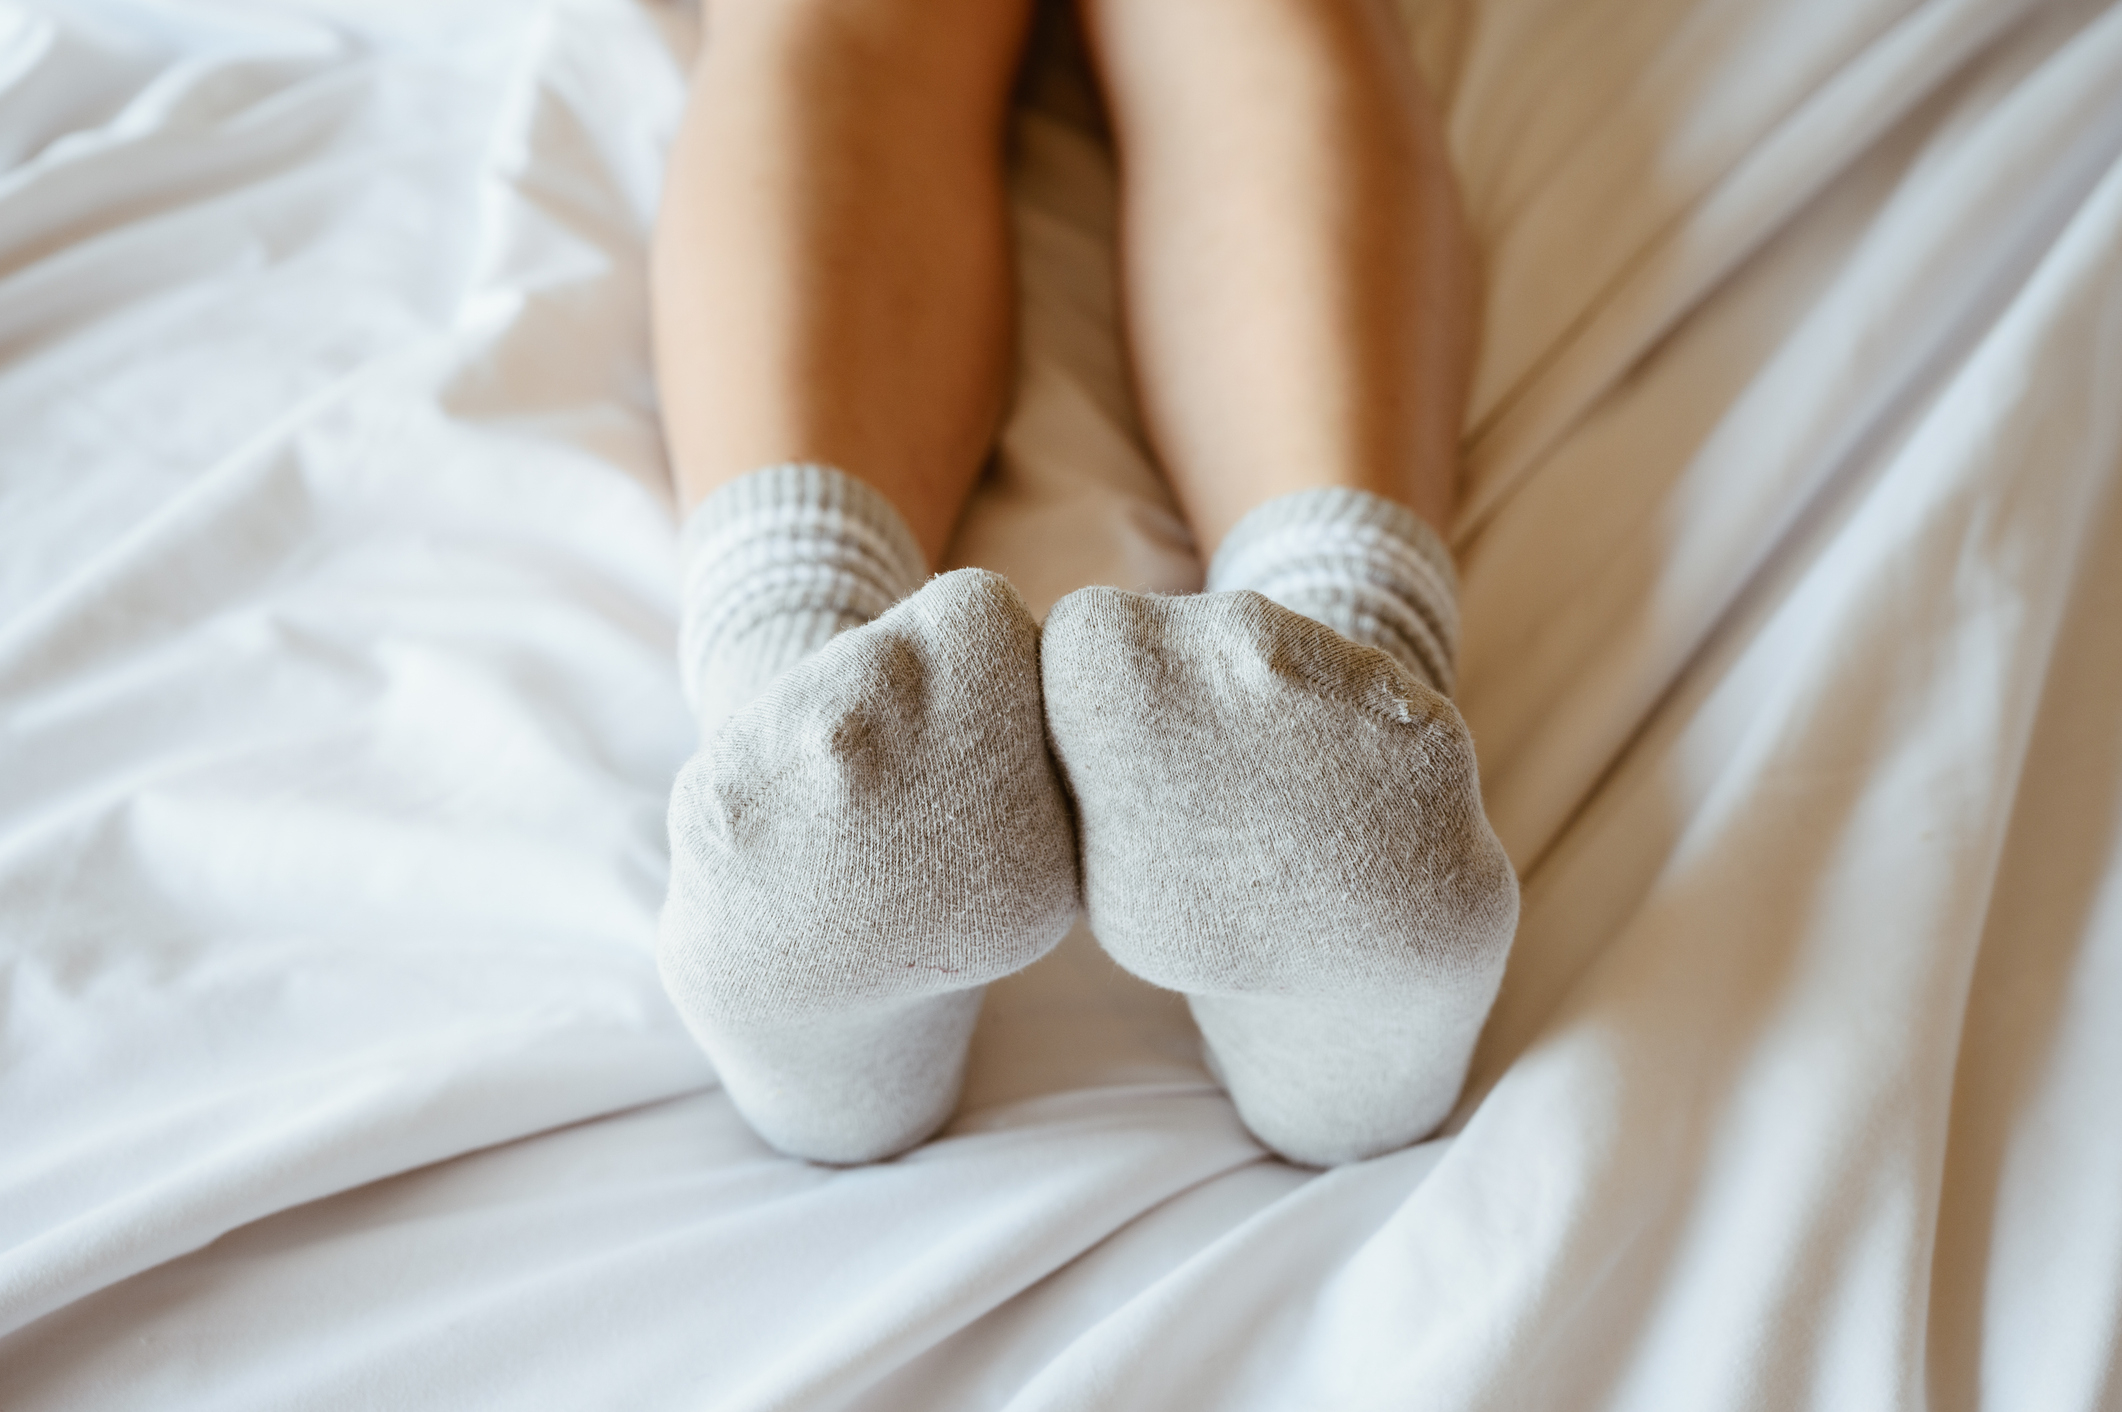 Person lying on a bed with their feet crossed, wearing plain socks, promoting relaxation